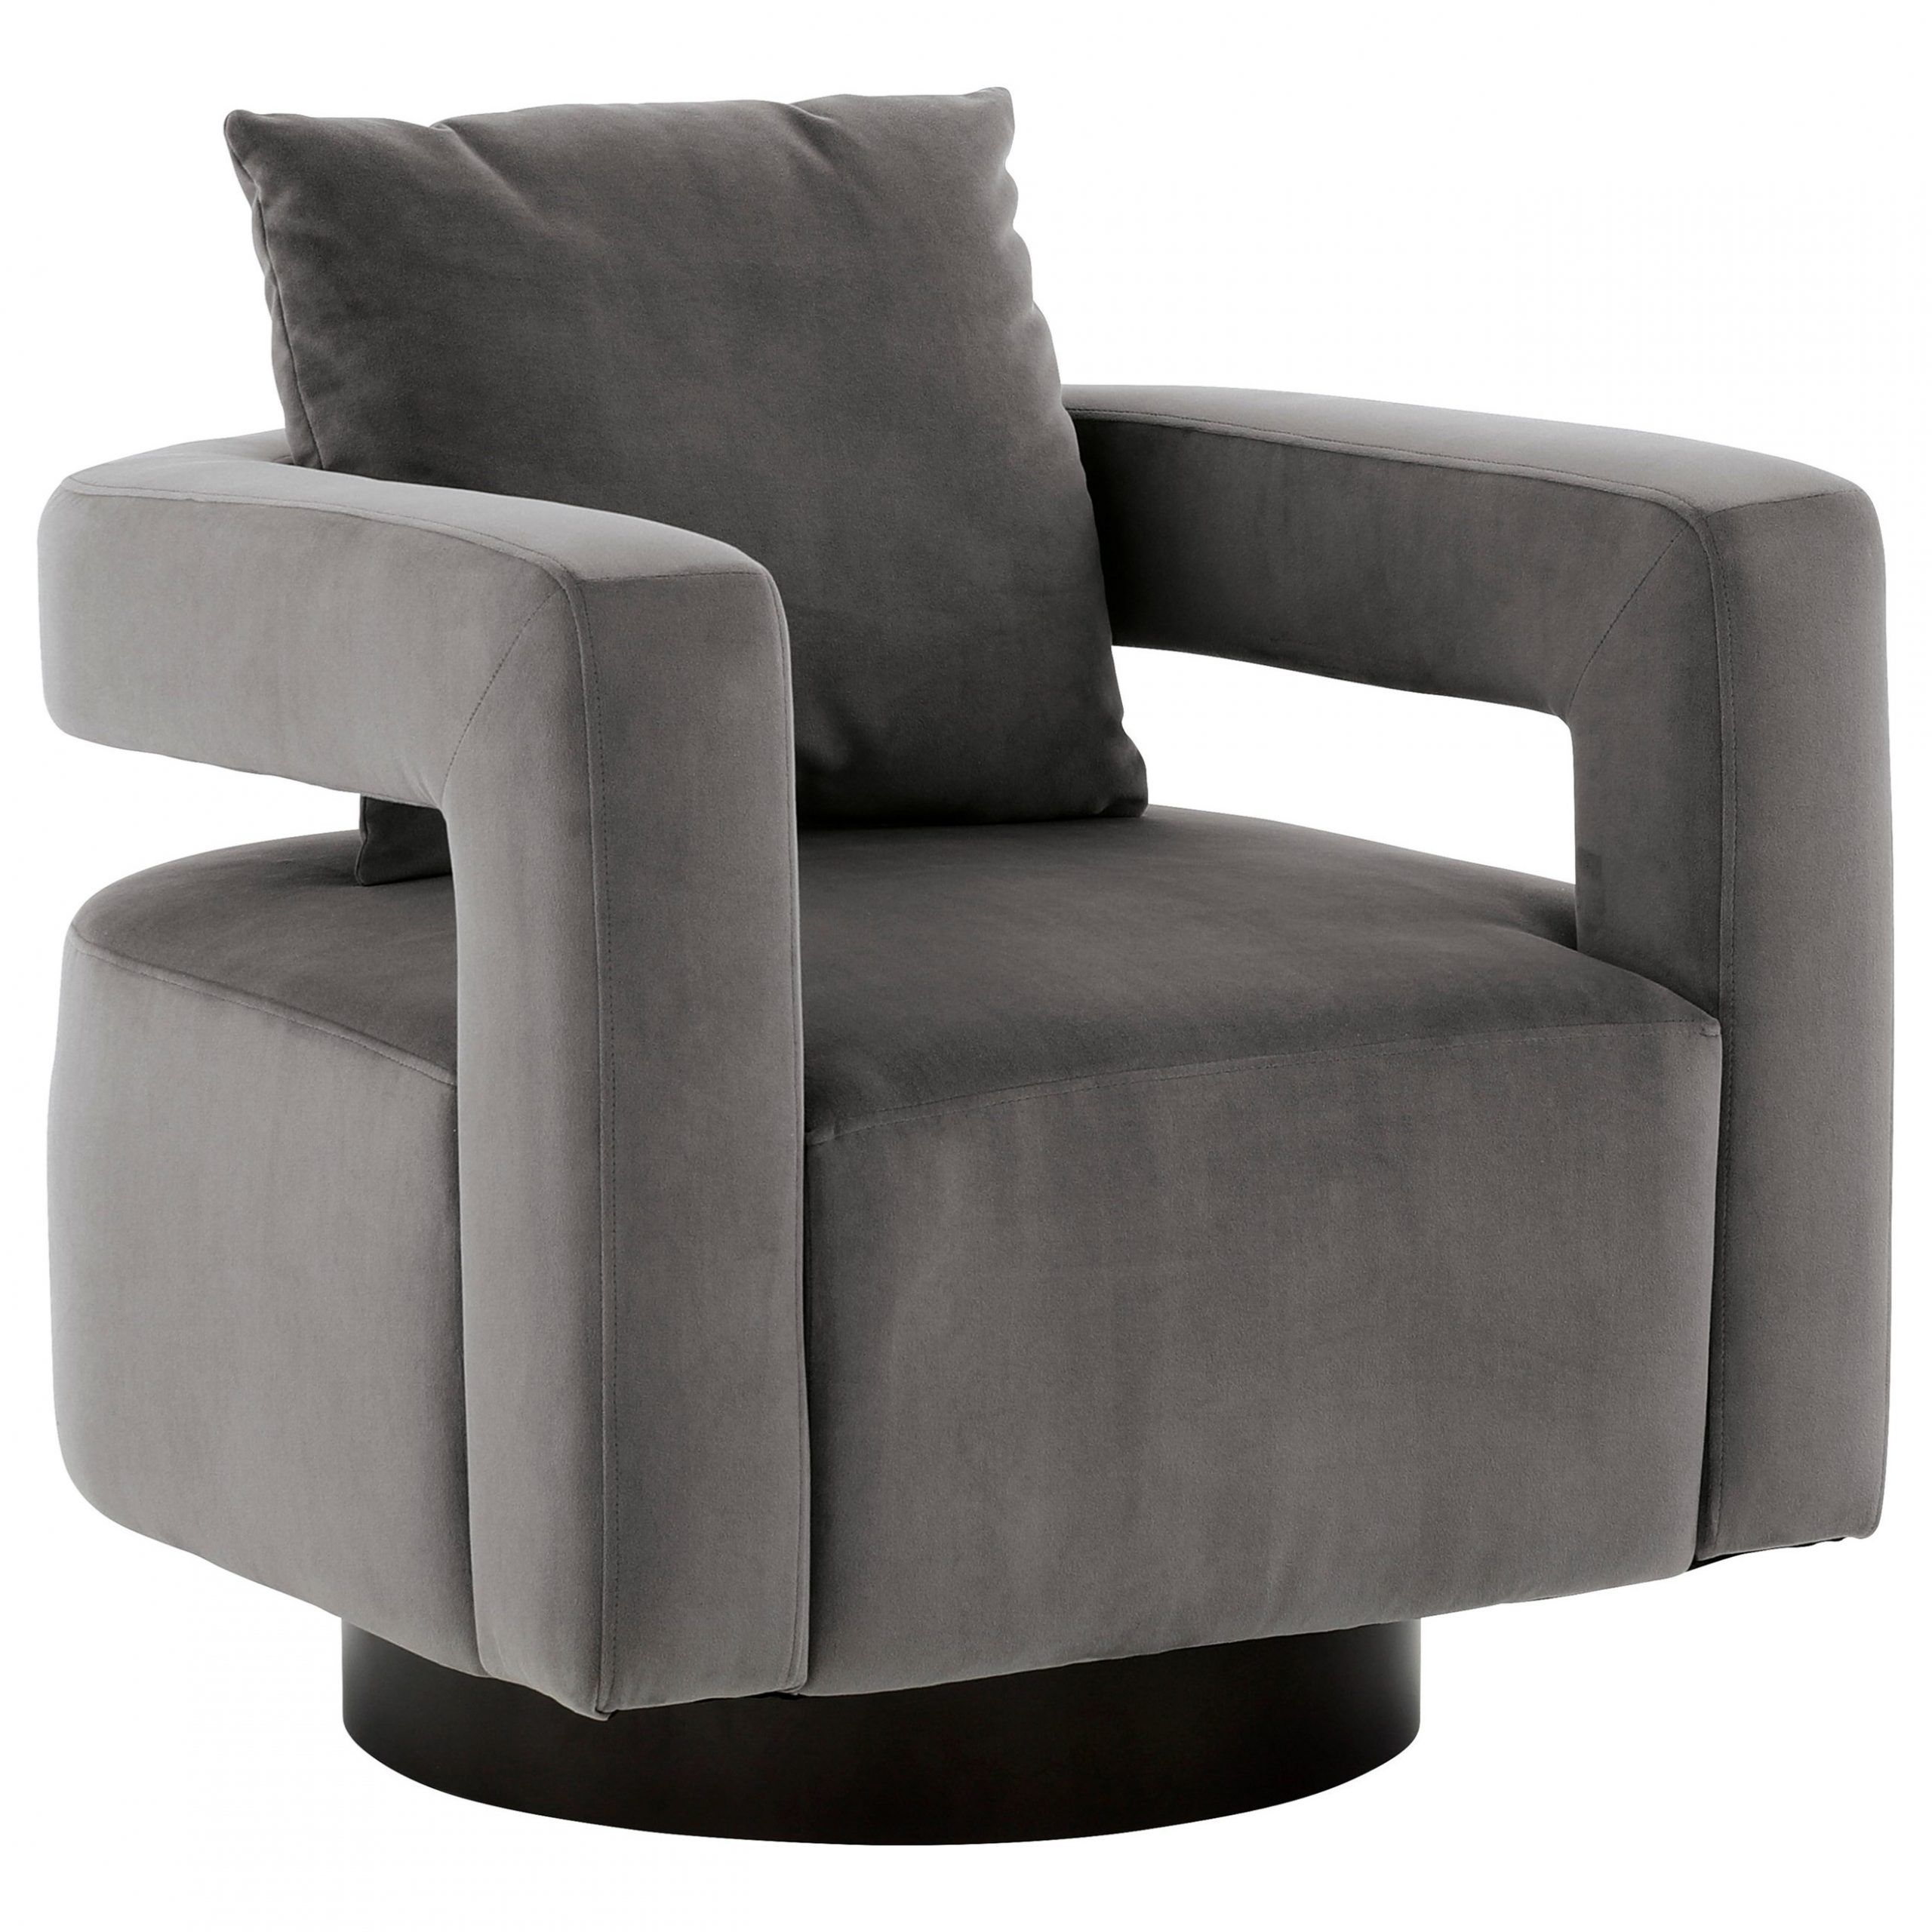 Gray Chenille Fabric Accent Stools Intended For Newest Signature Designashley Alcoma Contemporary Barrel Swivel Accent (View 7 of 10)